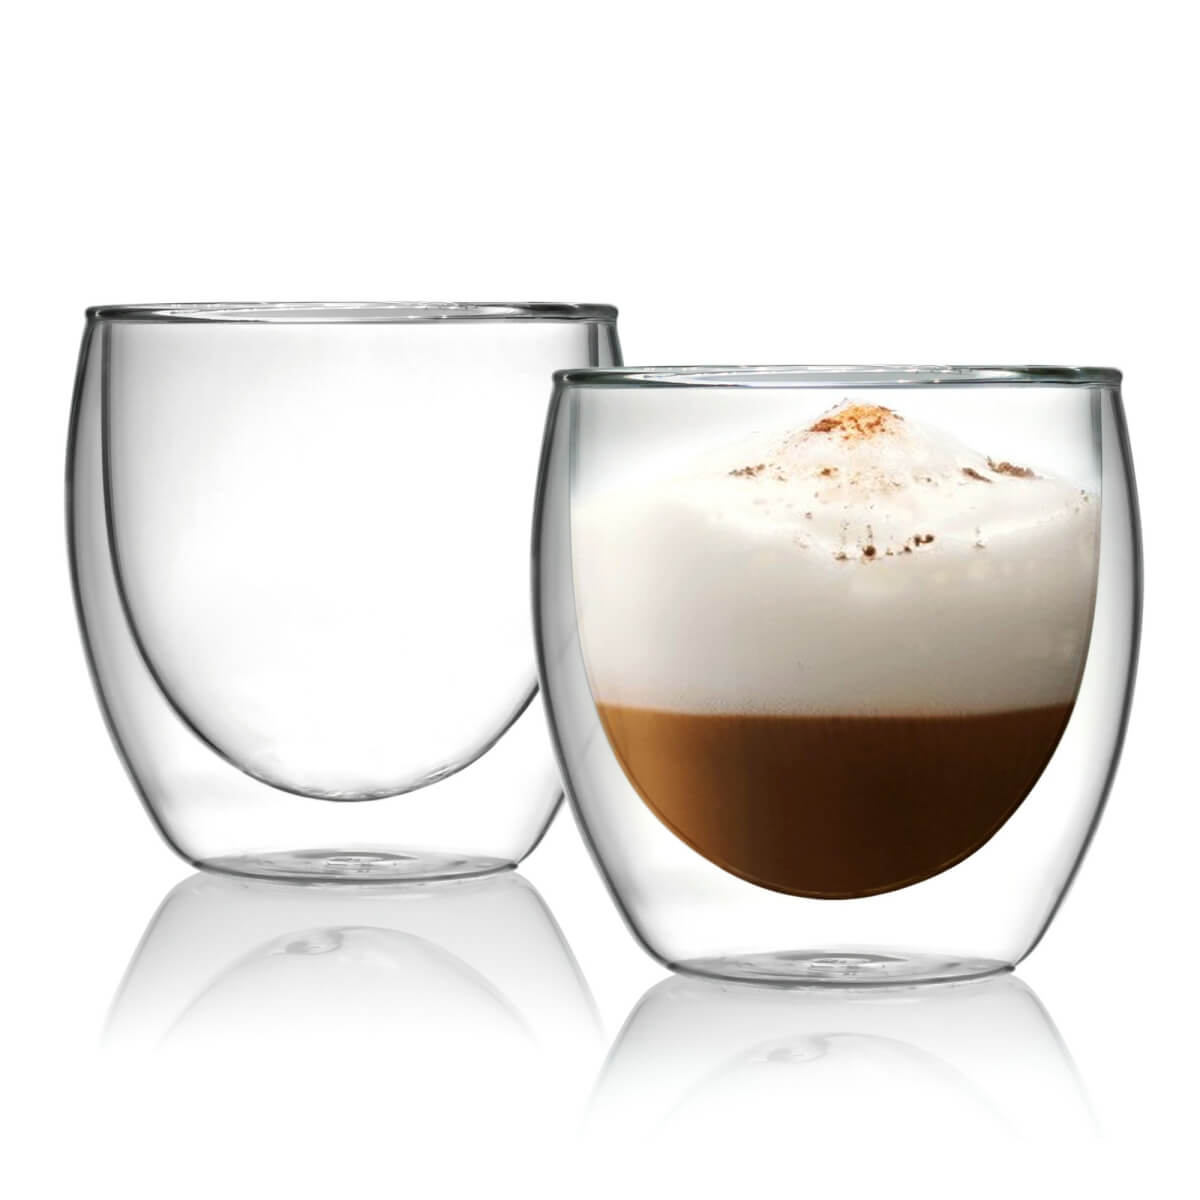 Kitchables Espresso Cups Shot Glass Coffee Set of 4 - Double Wall